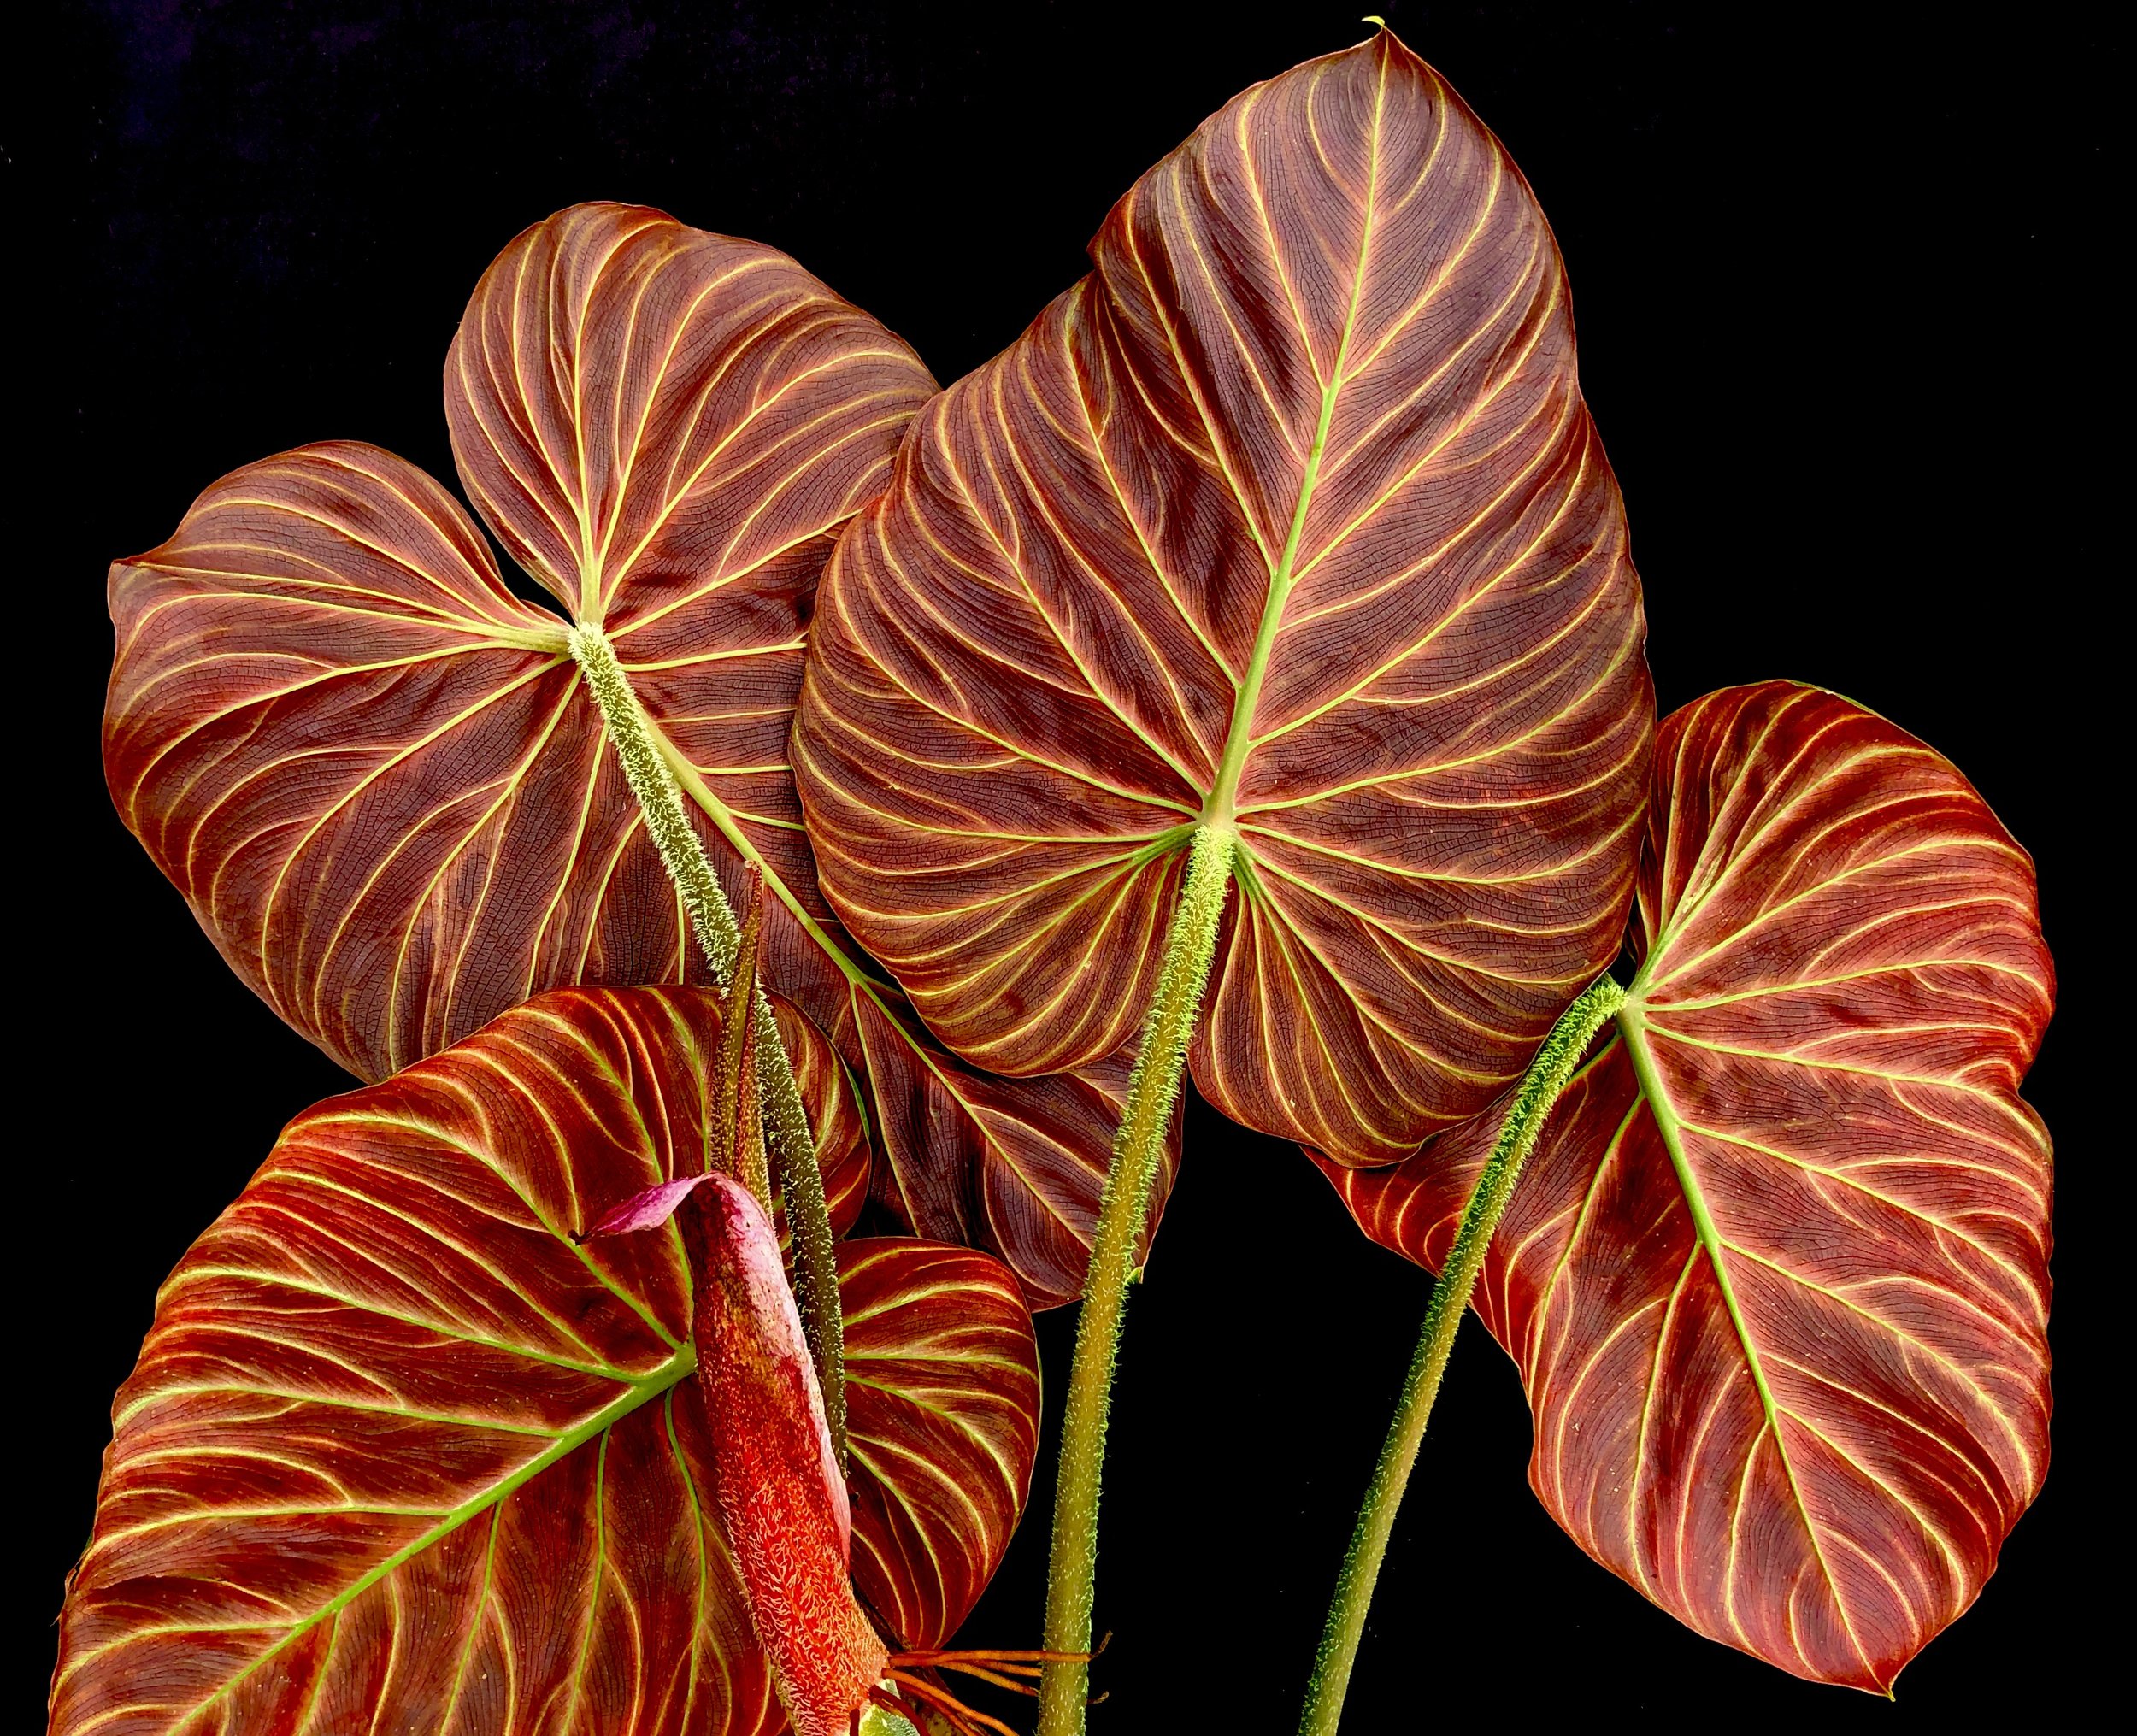  Crushed Velvet Philodendron , Philodendron verrucosum  Tico Blues cv. ‘Queen of Hearts’. Image: ©J. Vannini 